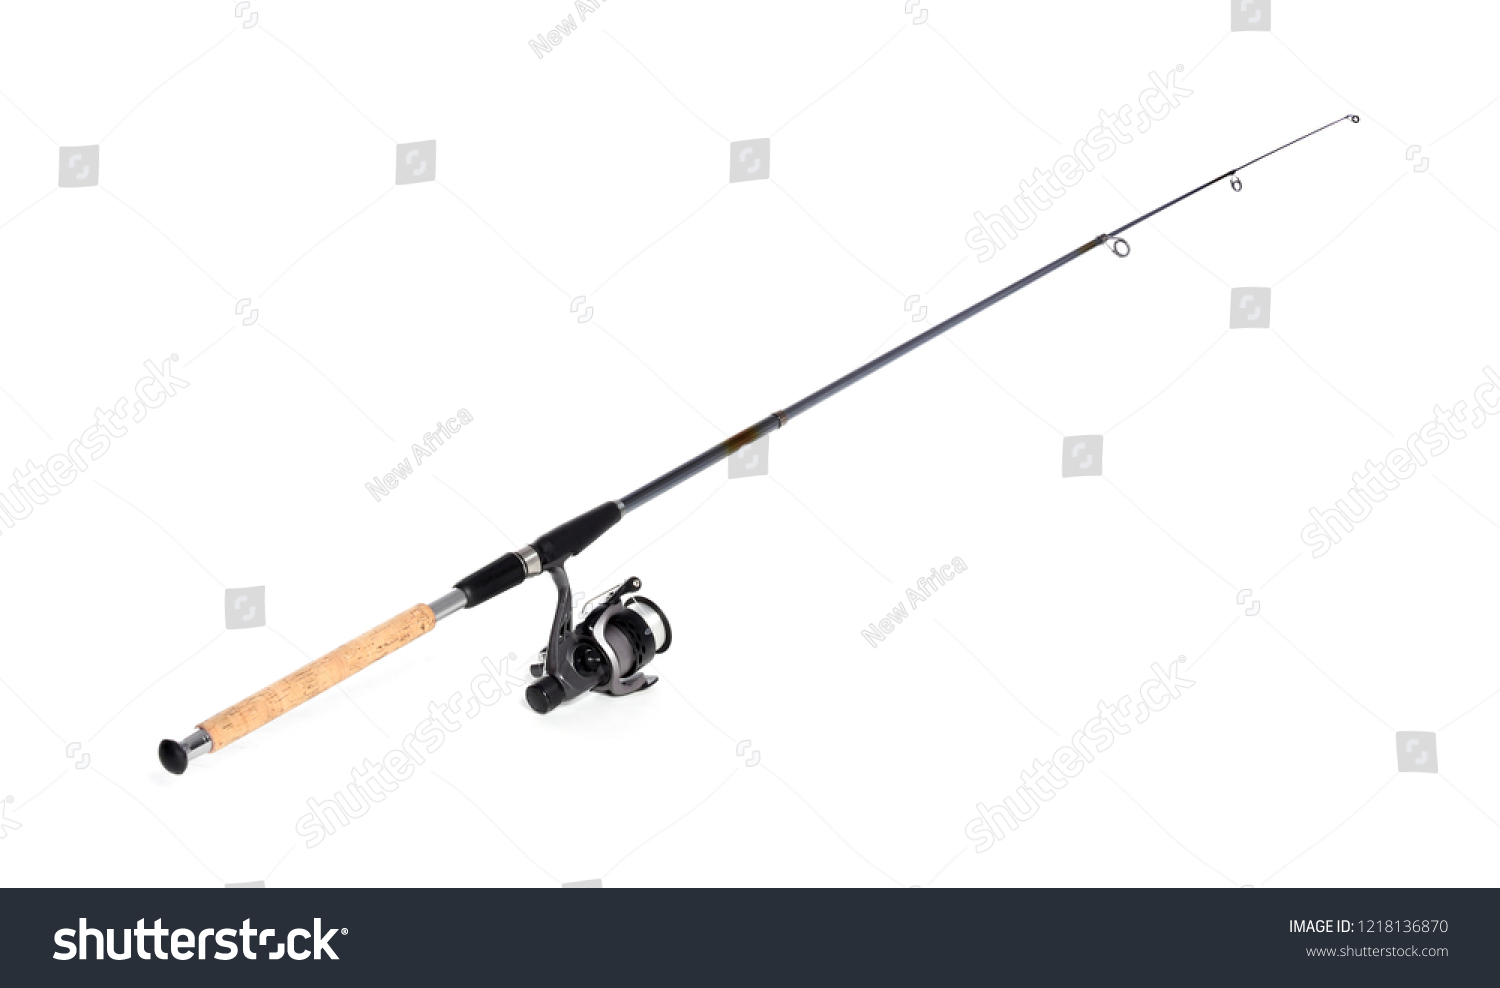 Modern fishing rod with reel on white background #1218136870